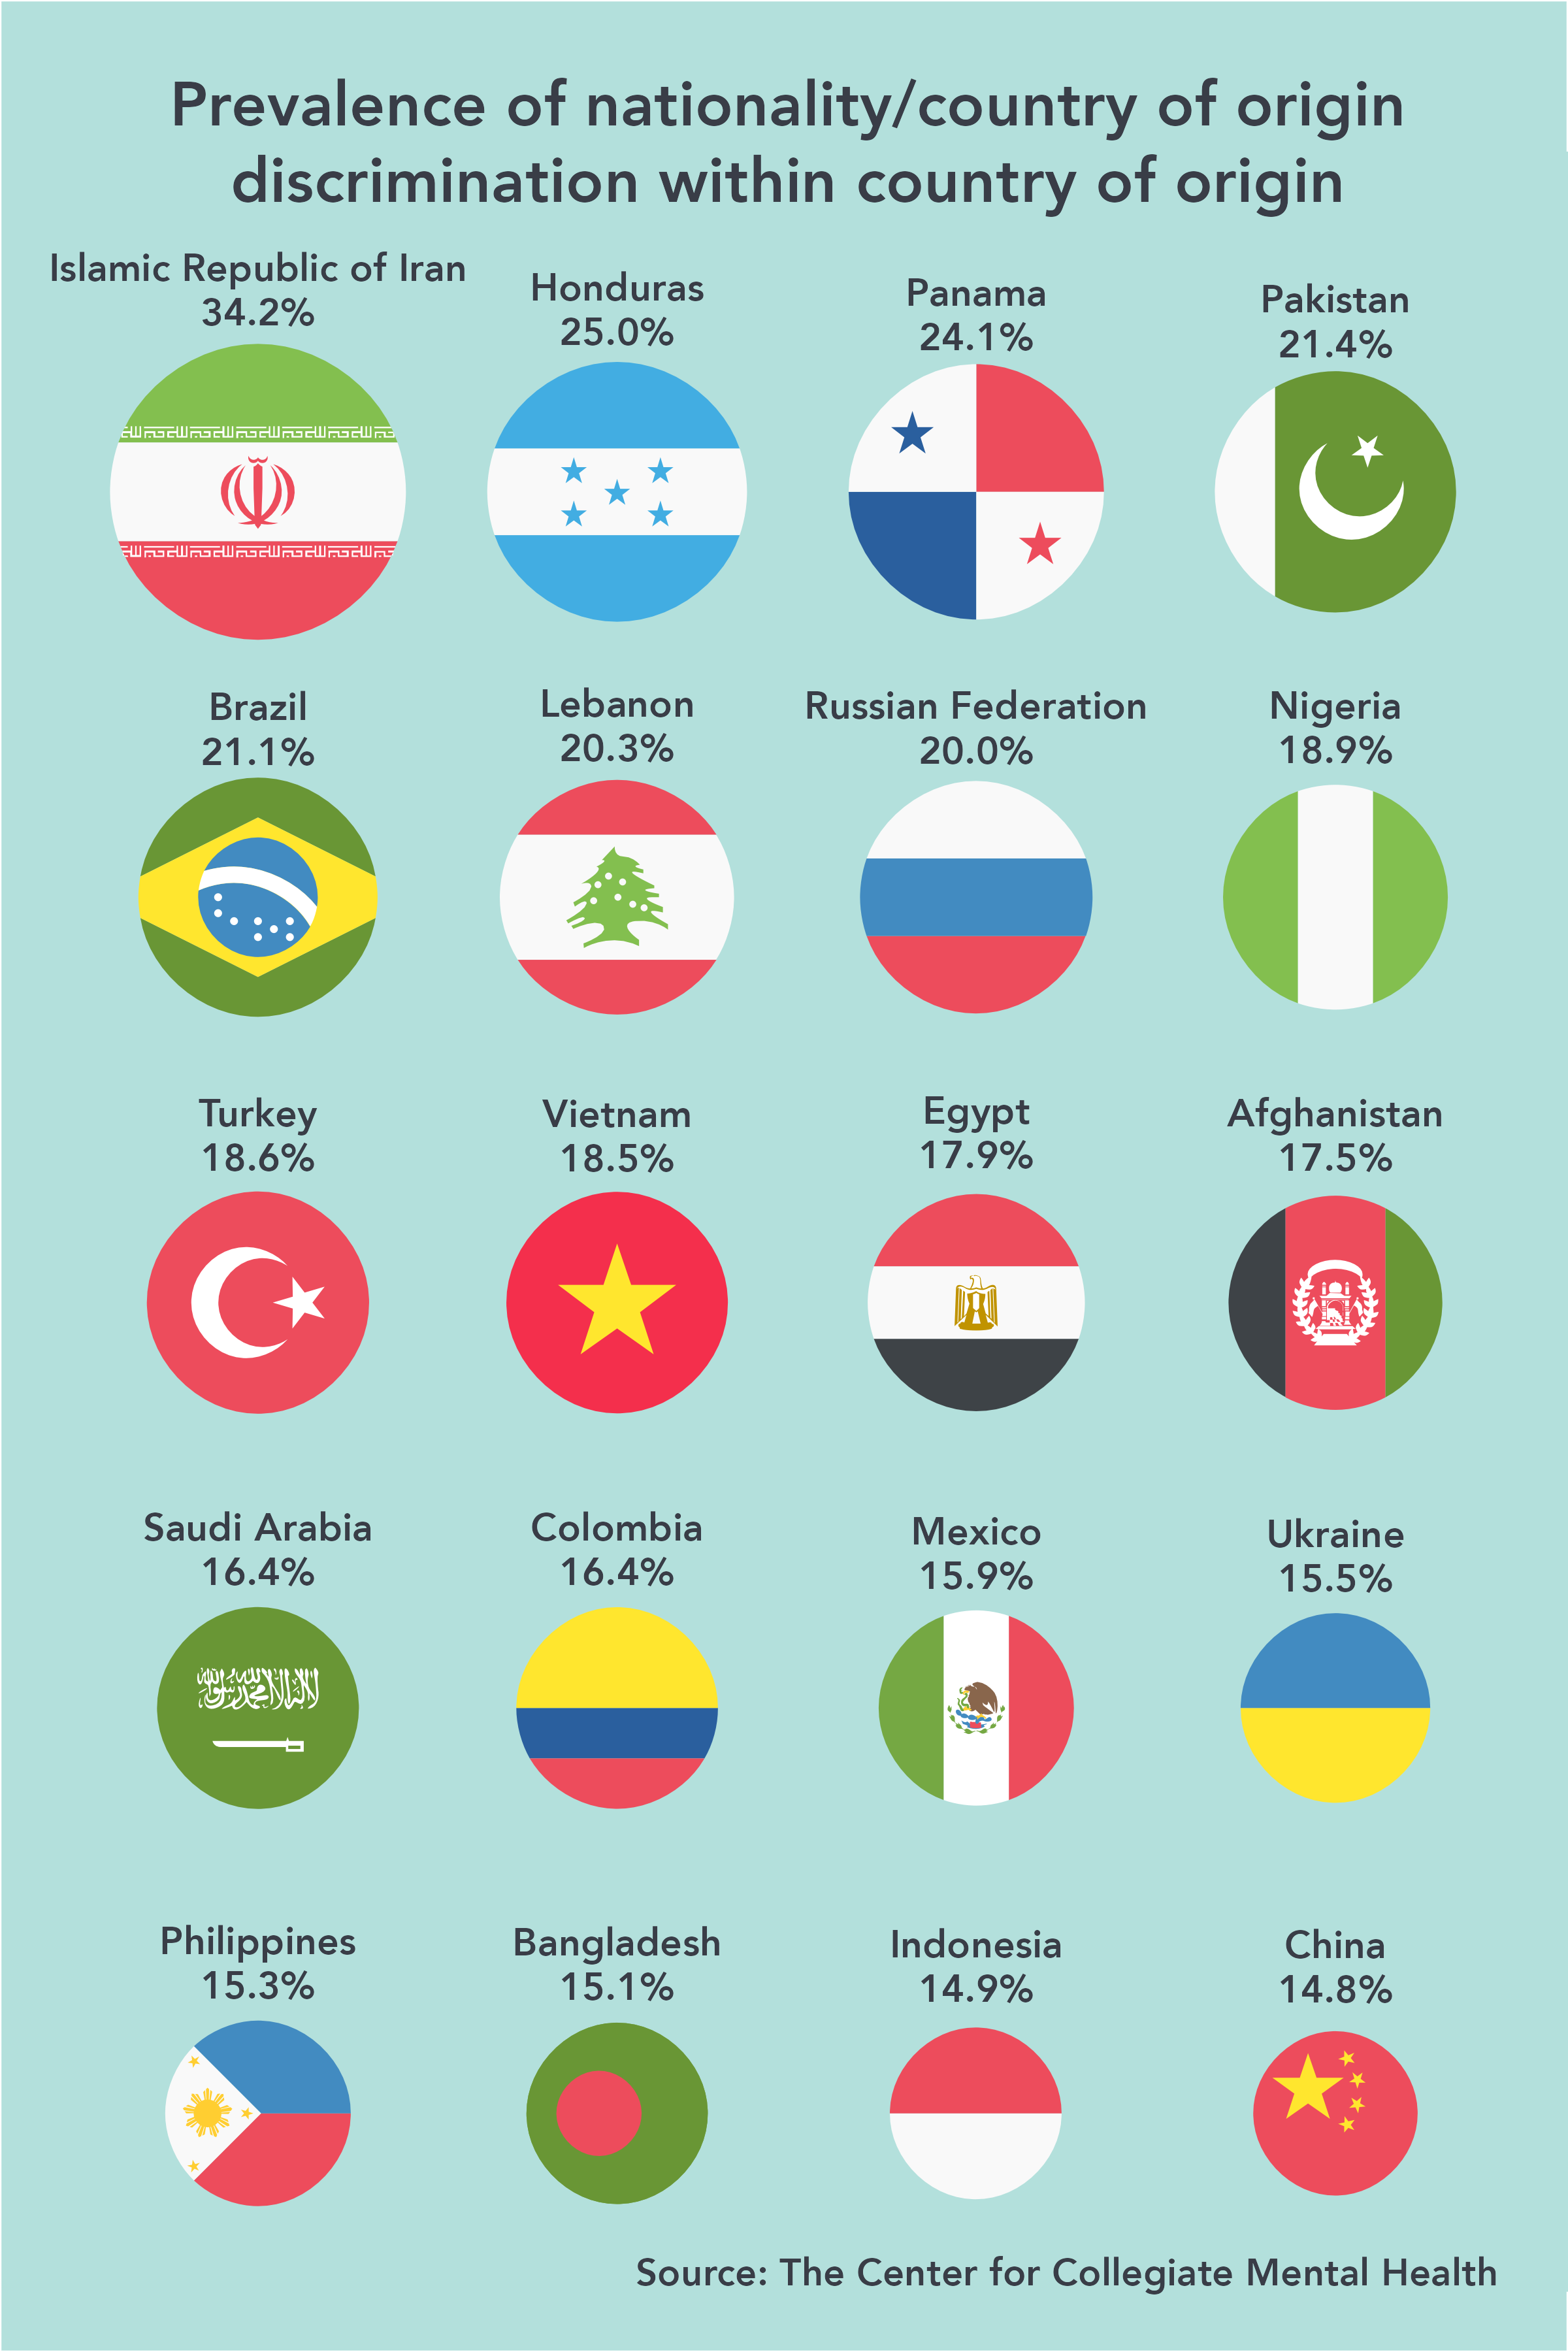 Students from the Islamic Republic of Iran reported the highest rates of nationality/country of origin discrimination (34.2%).  Honduras, Panama, Pakistan, Brazil, Lebanon, and the Russian Federation demonstrated similar frequencies of discrimination, ranging from 25% to 20%. 